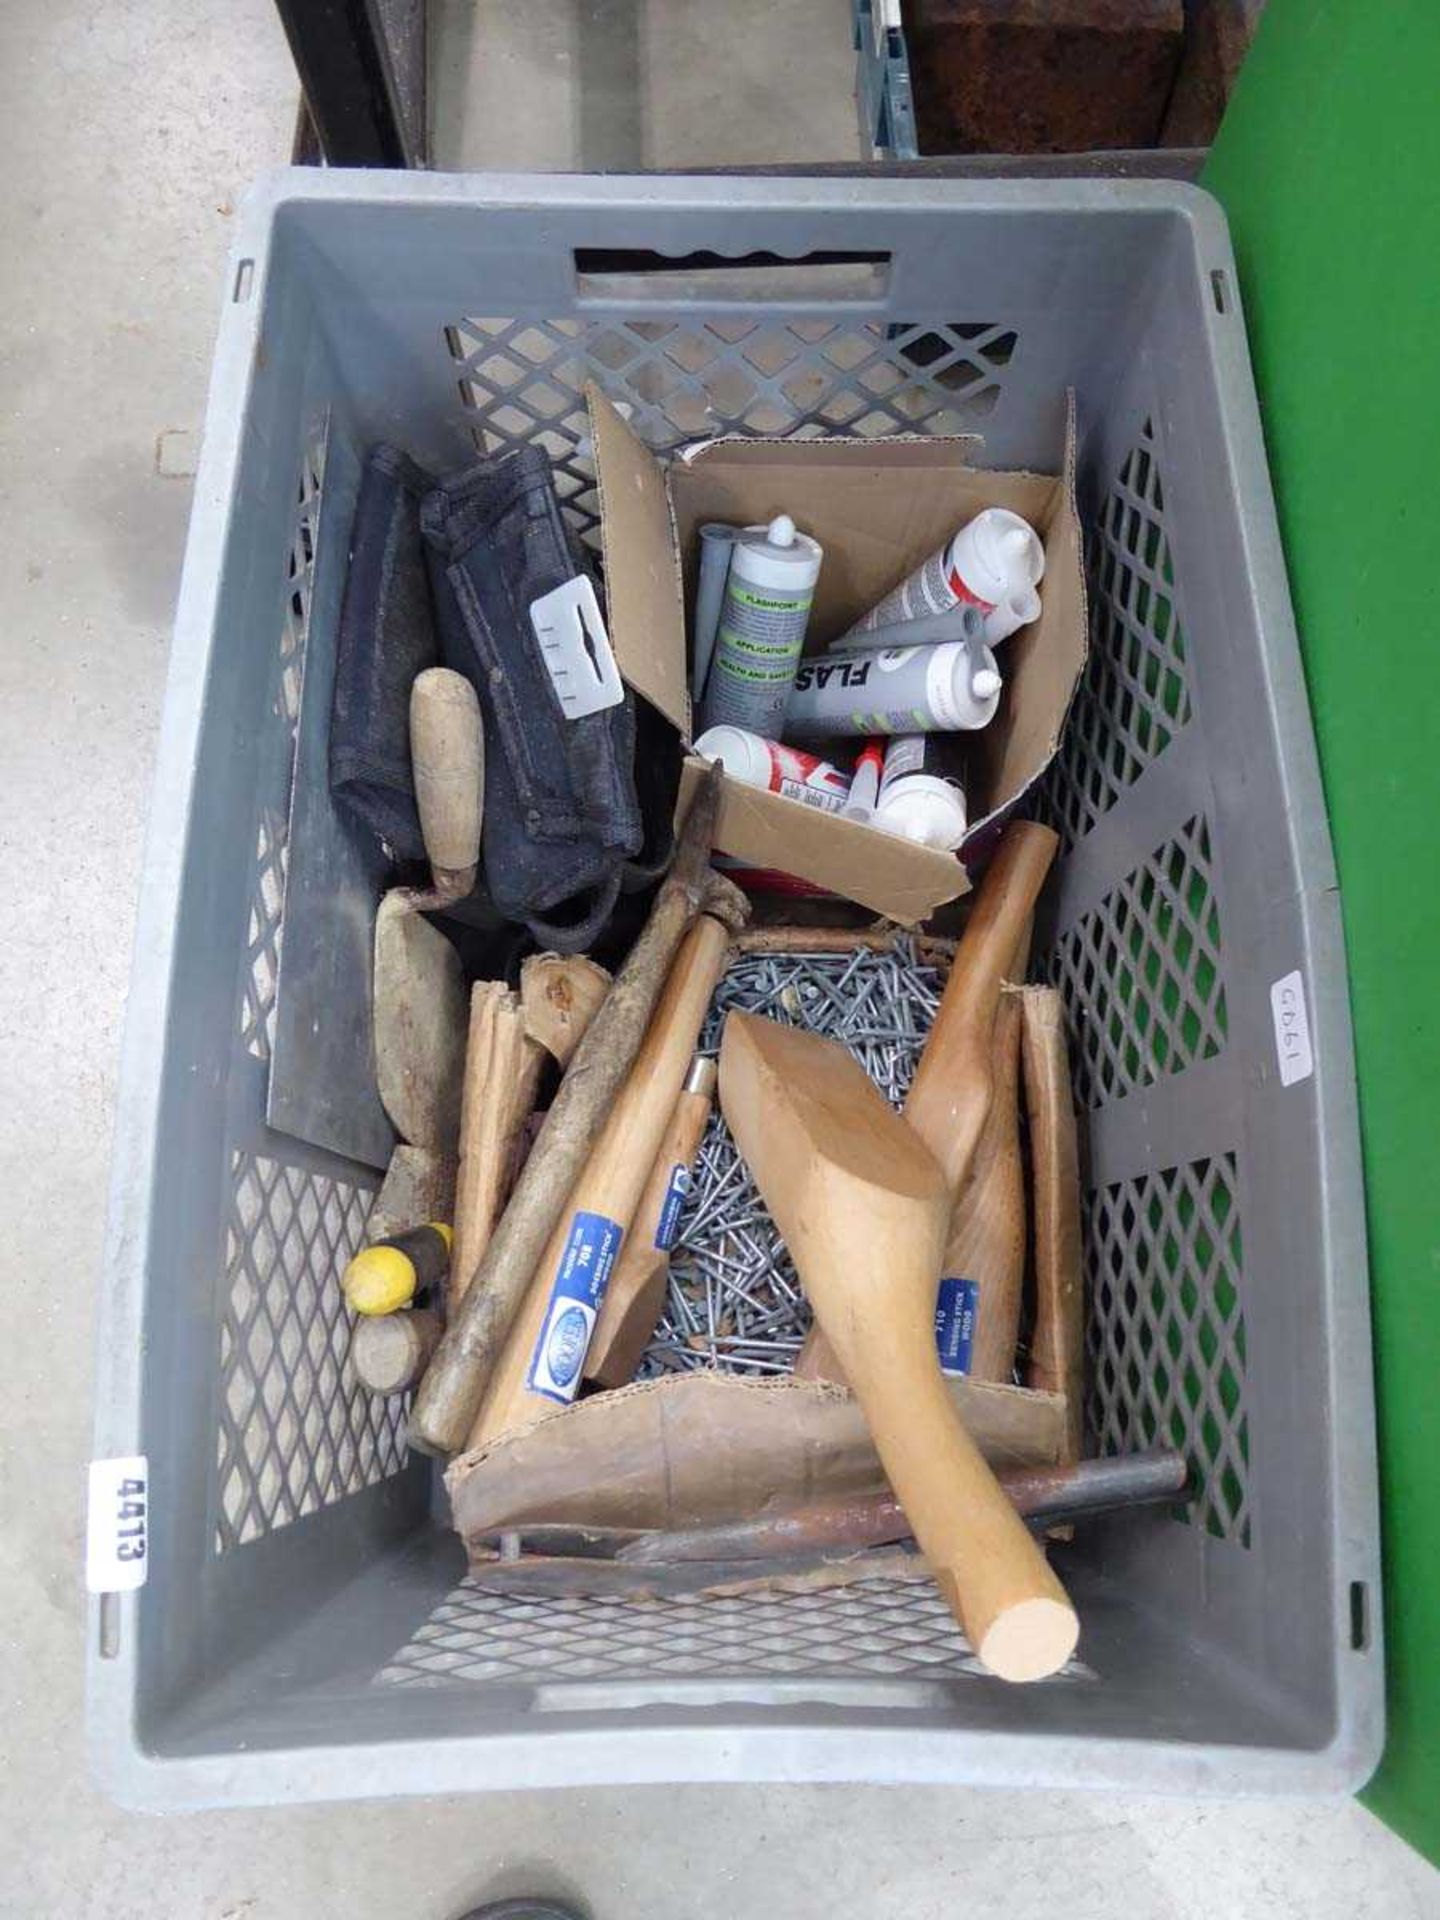 Large plastic crate containing nails, leadbeaters, trowels, silicon etc.